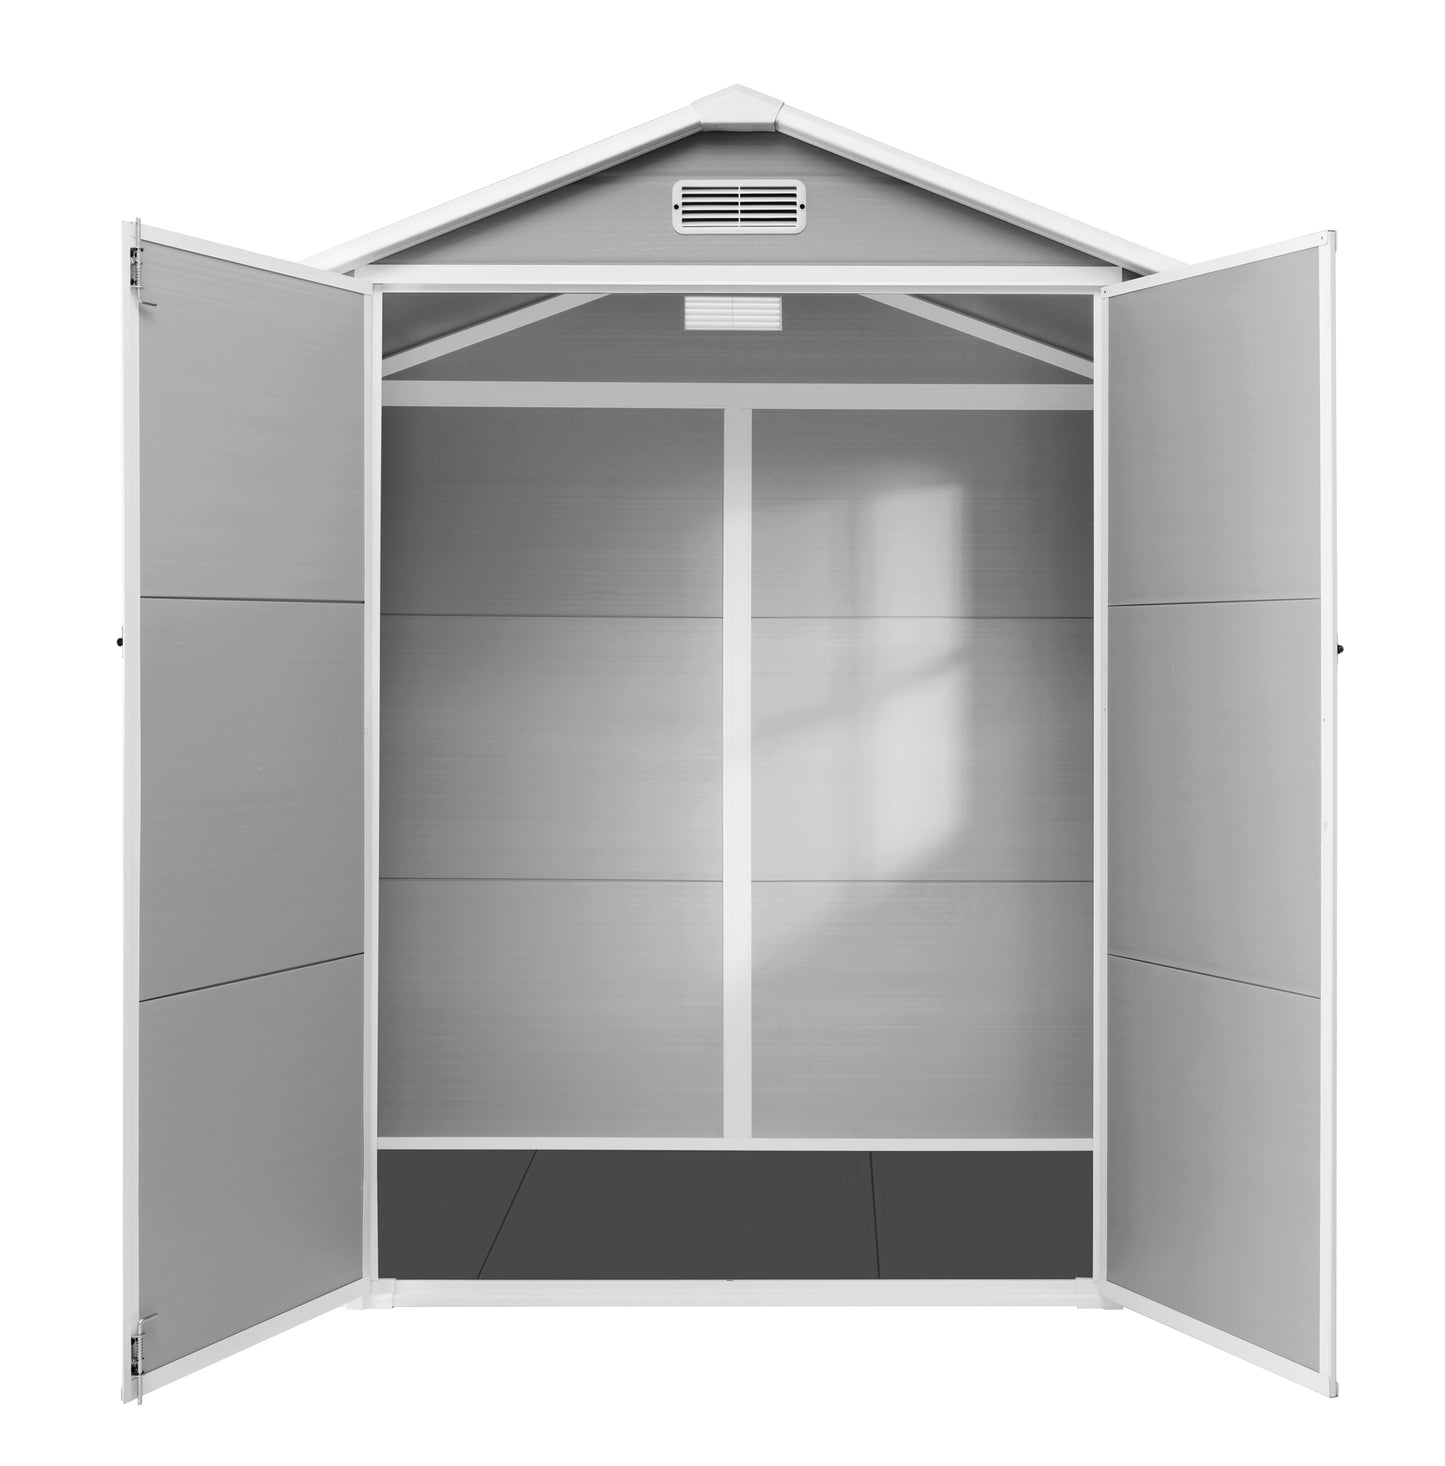 Syngar 6ft x 4ft Outdoor Plastic Storage Shed, All-Weather Tool Shed with Reinforced Floor, Pitched Roof and Double Lockable Doors, Large Garden Shed for Bikes, Lawnmowers, Trash Cans, Grey & White